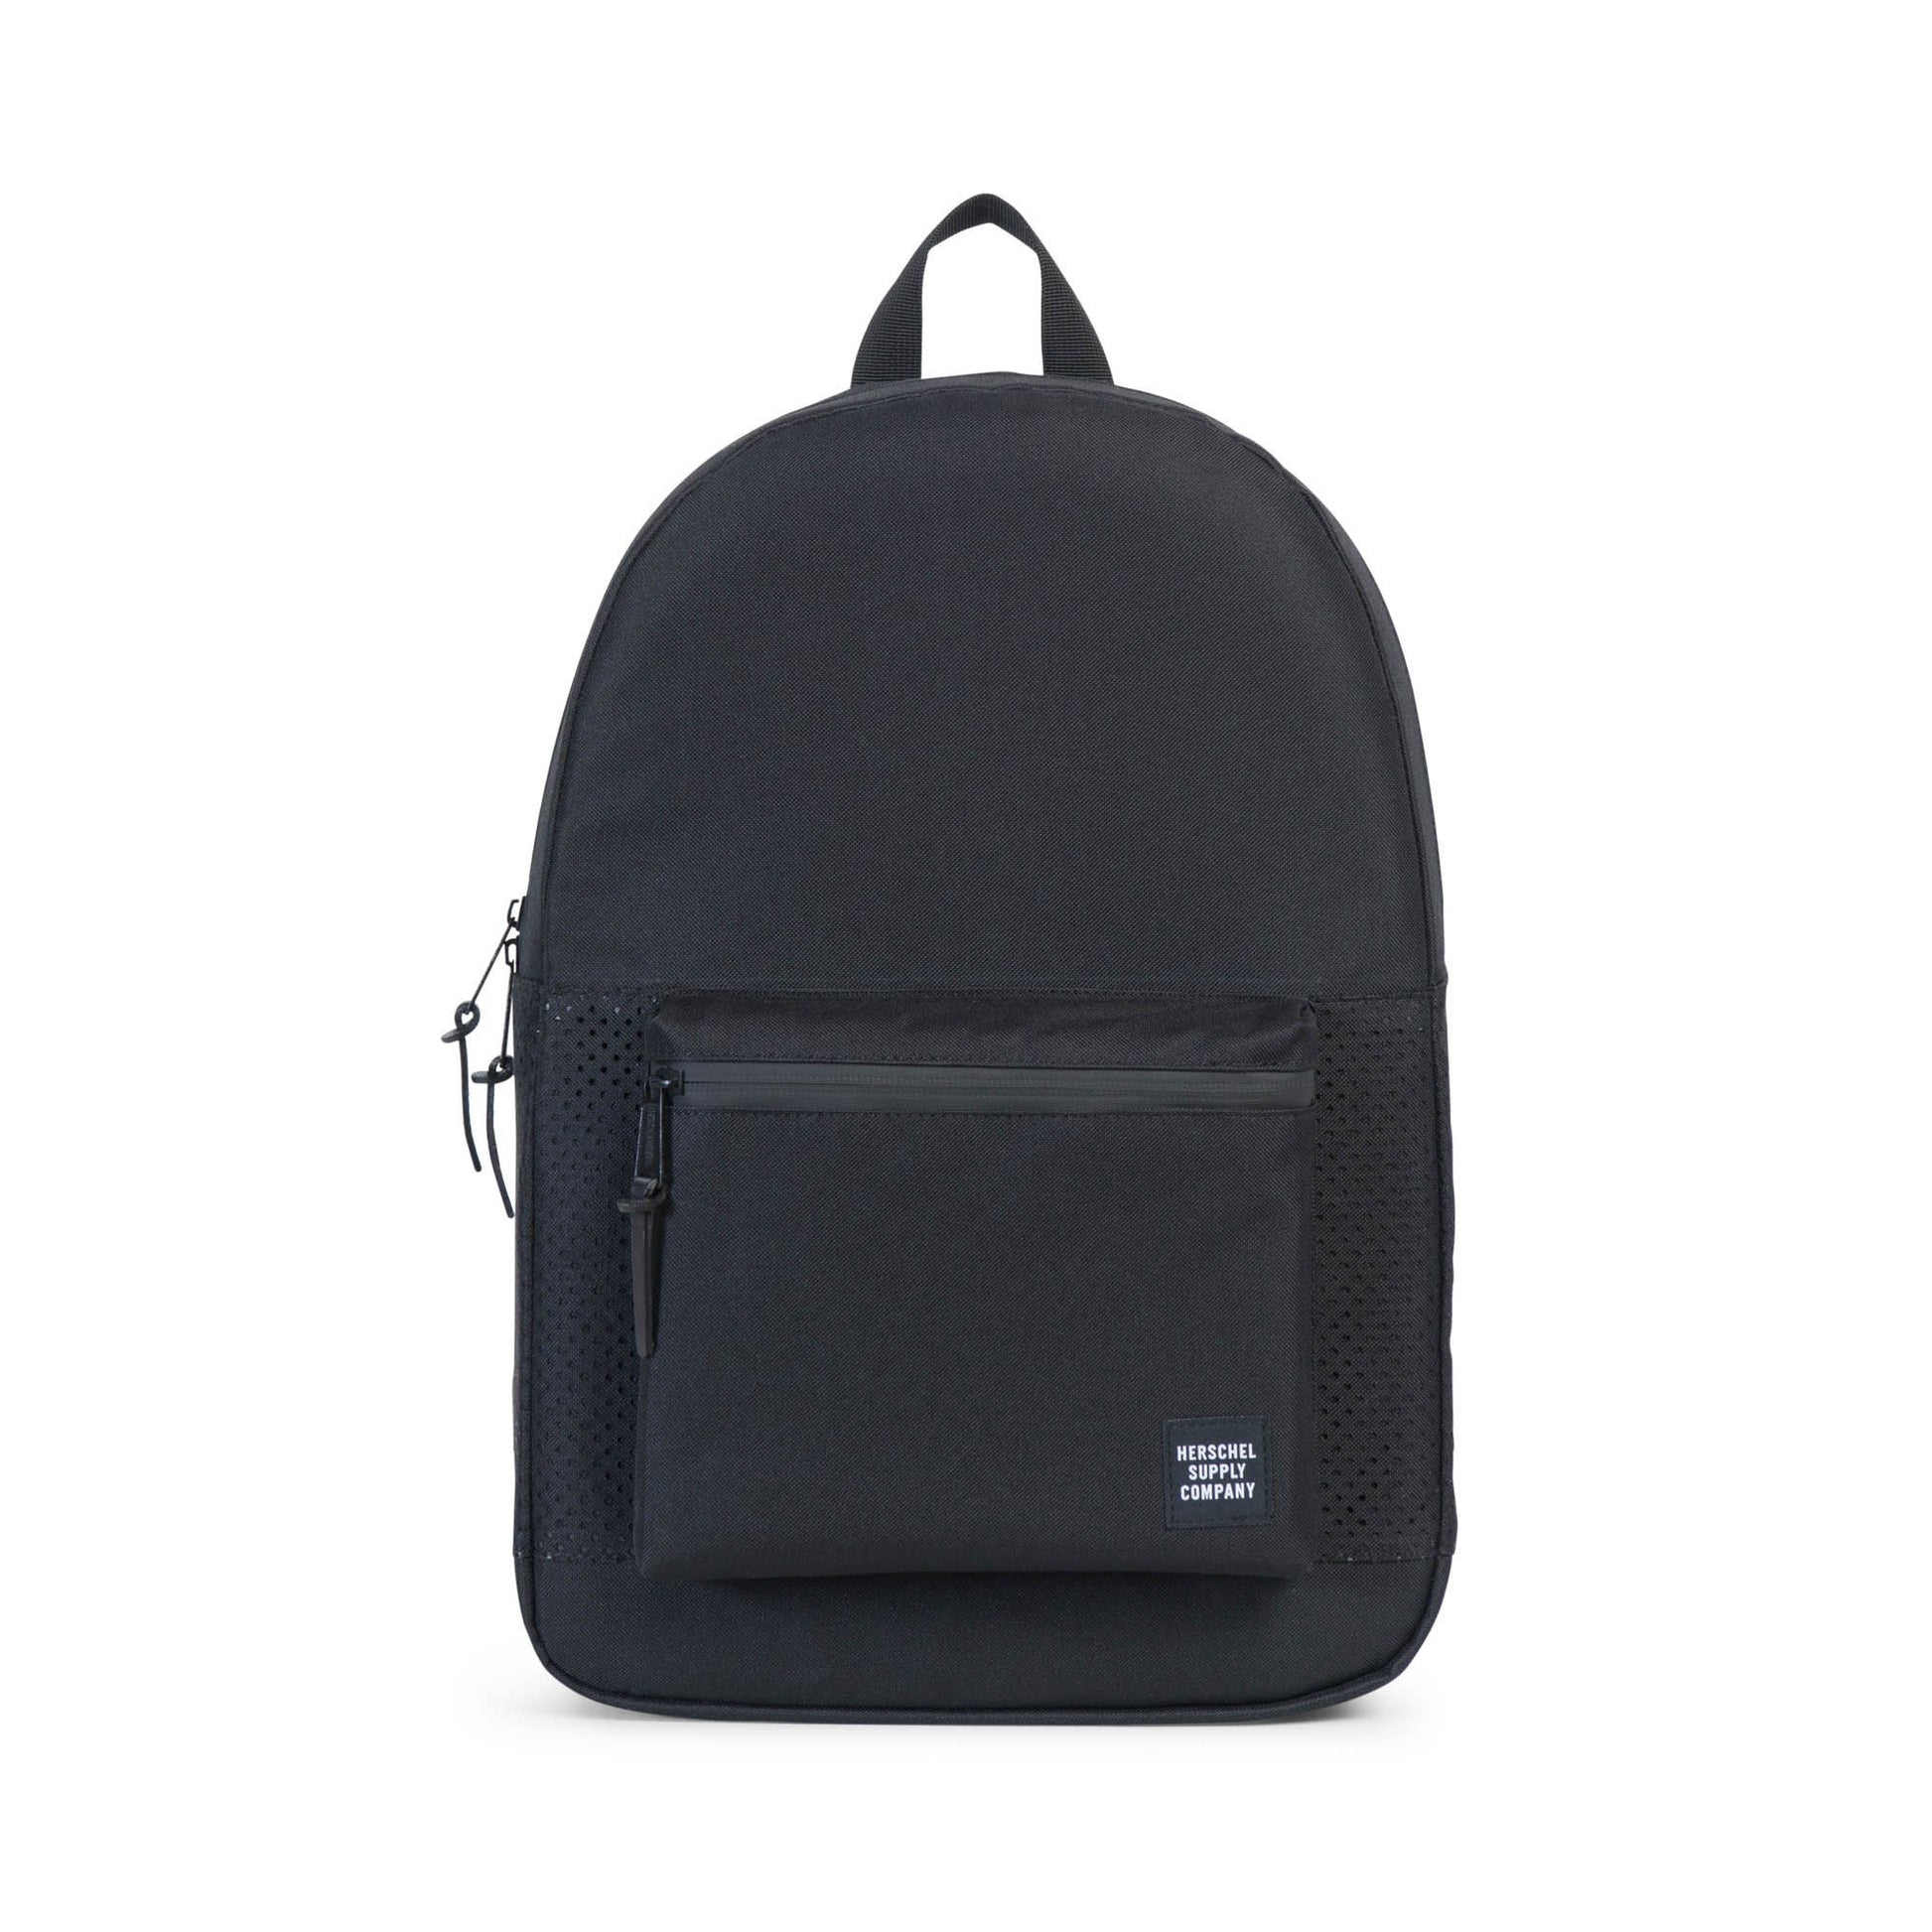 Herschel Supply Co. - Settlement Backpack, Perforated Black/Black - The Giant Peach